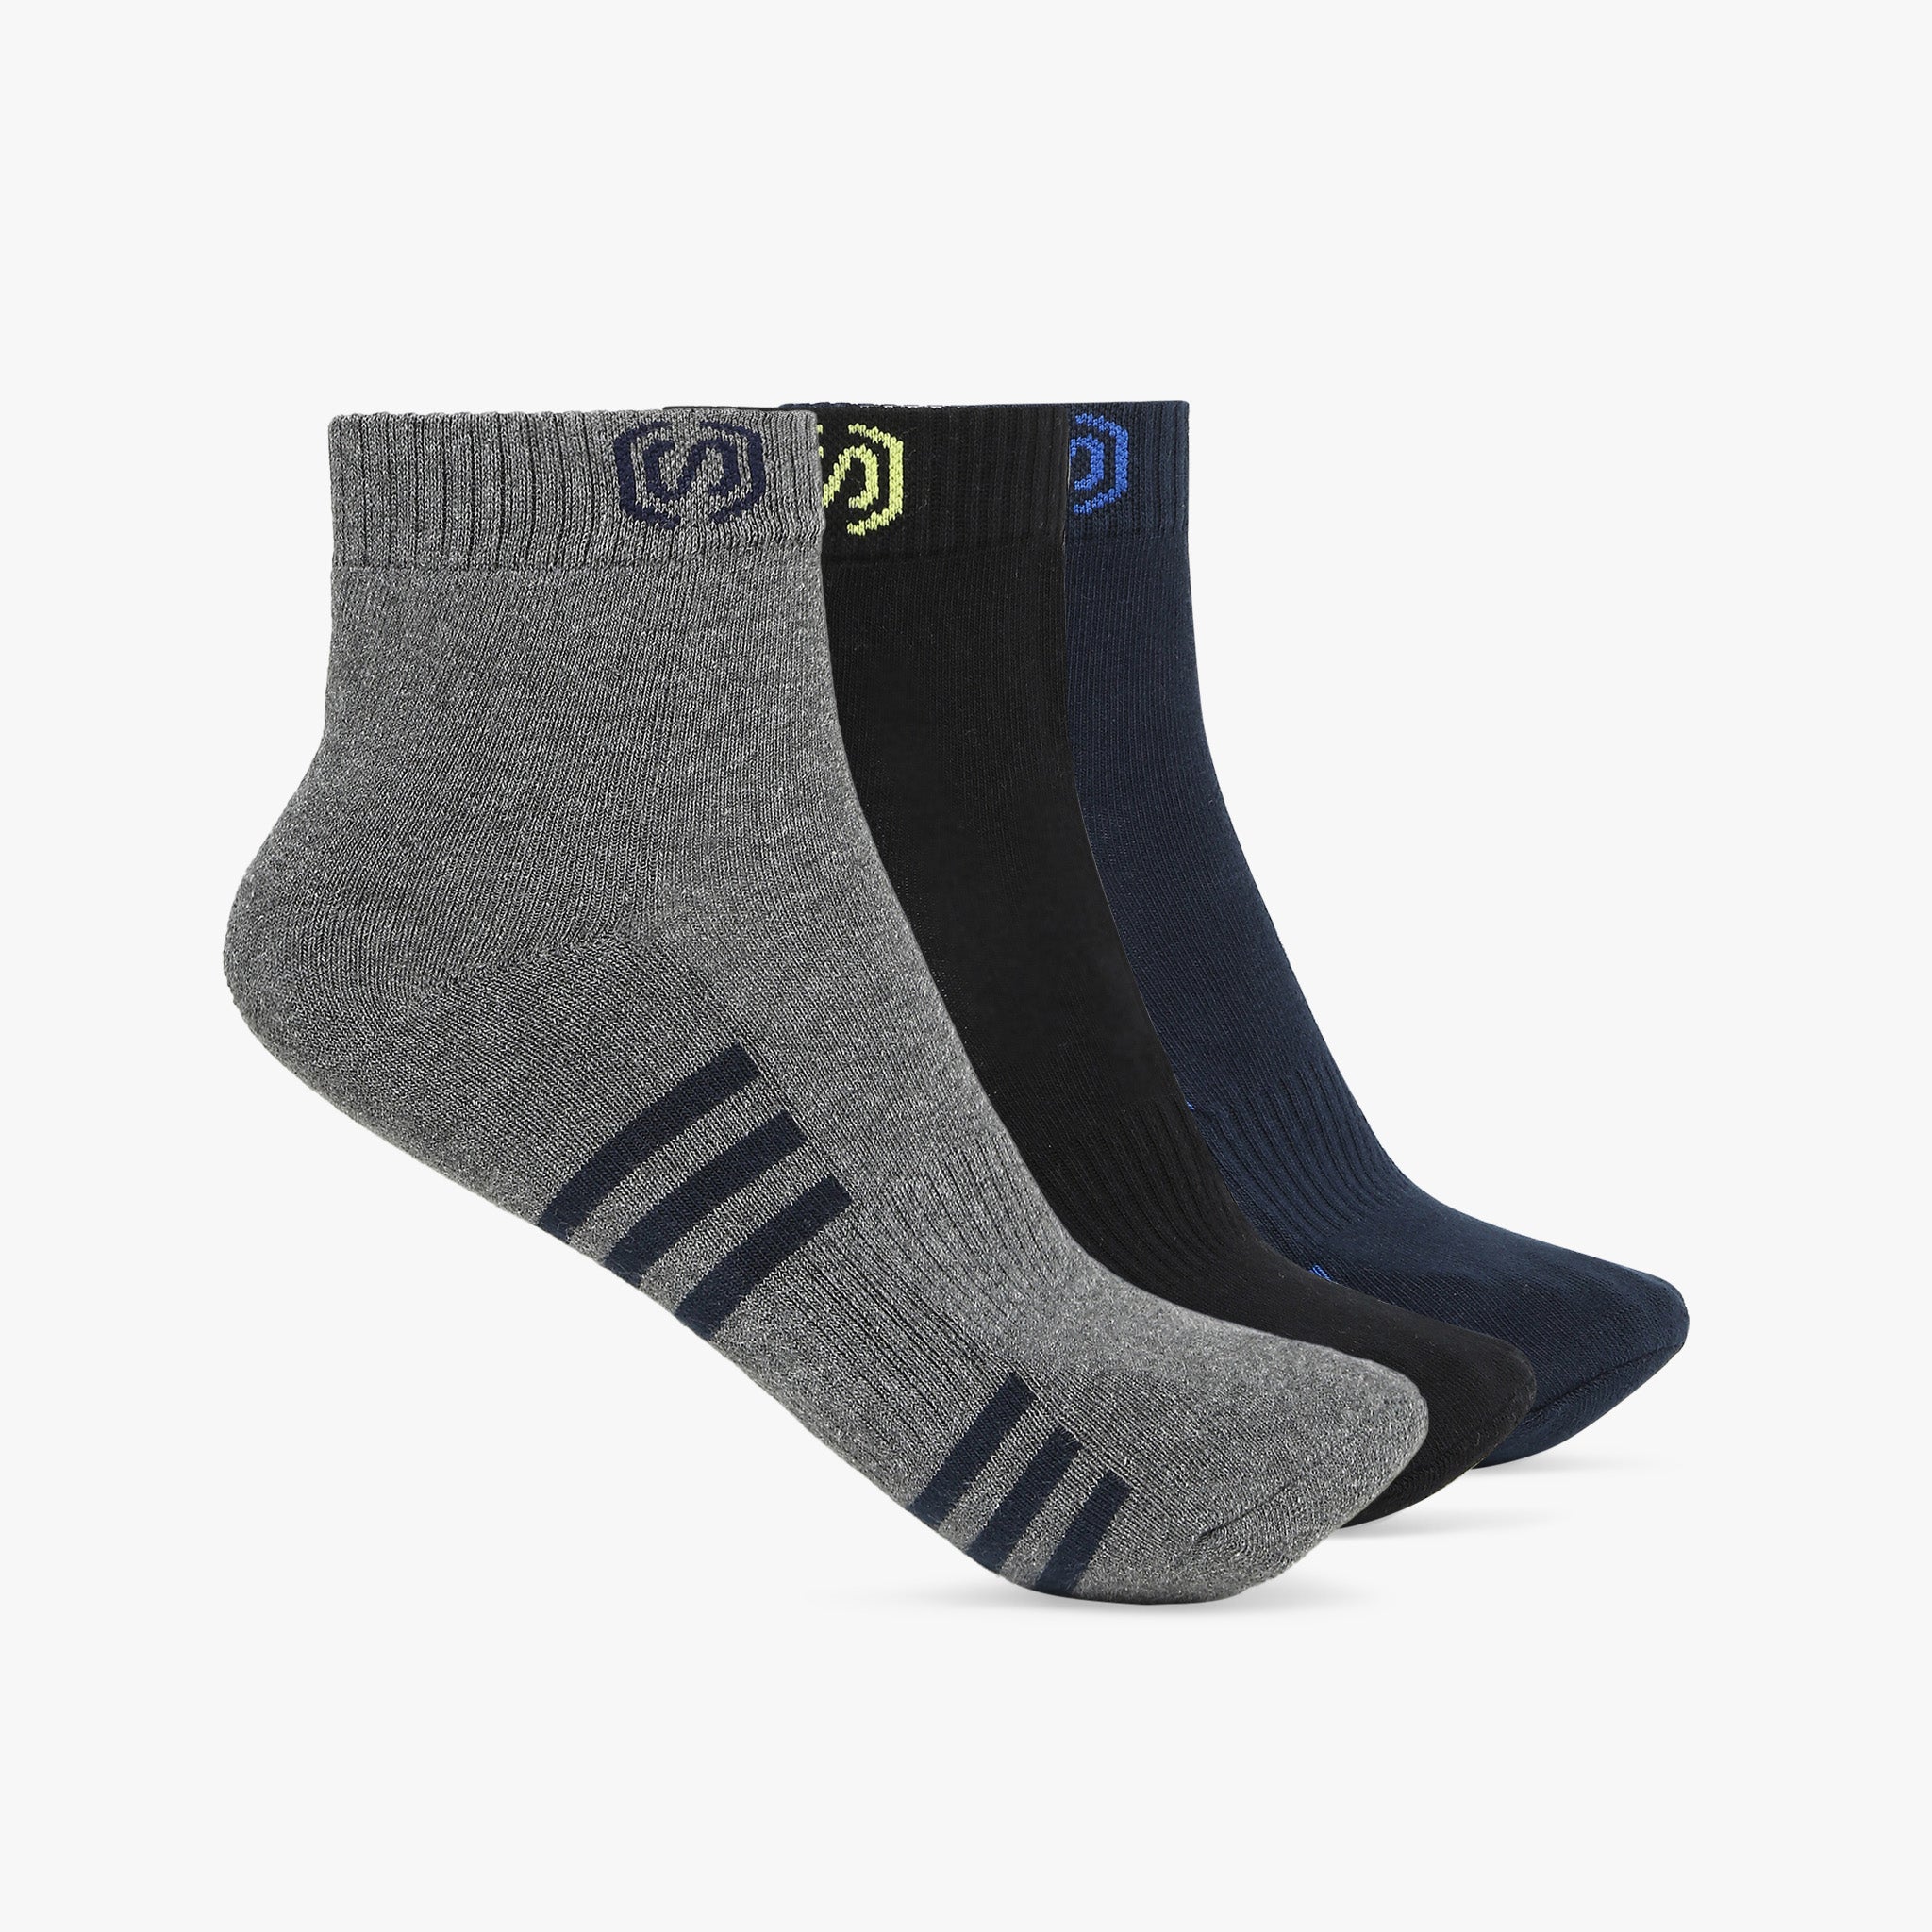 Buy Assorted Free Size Ankle Socks - Style Union